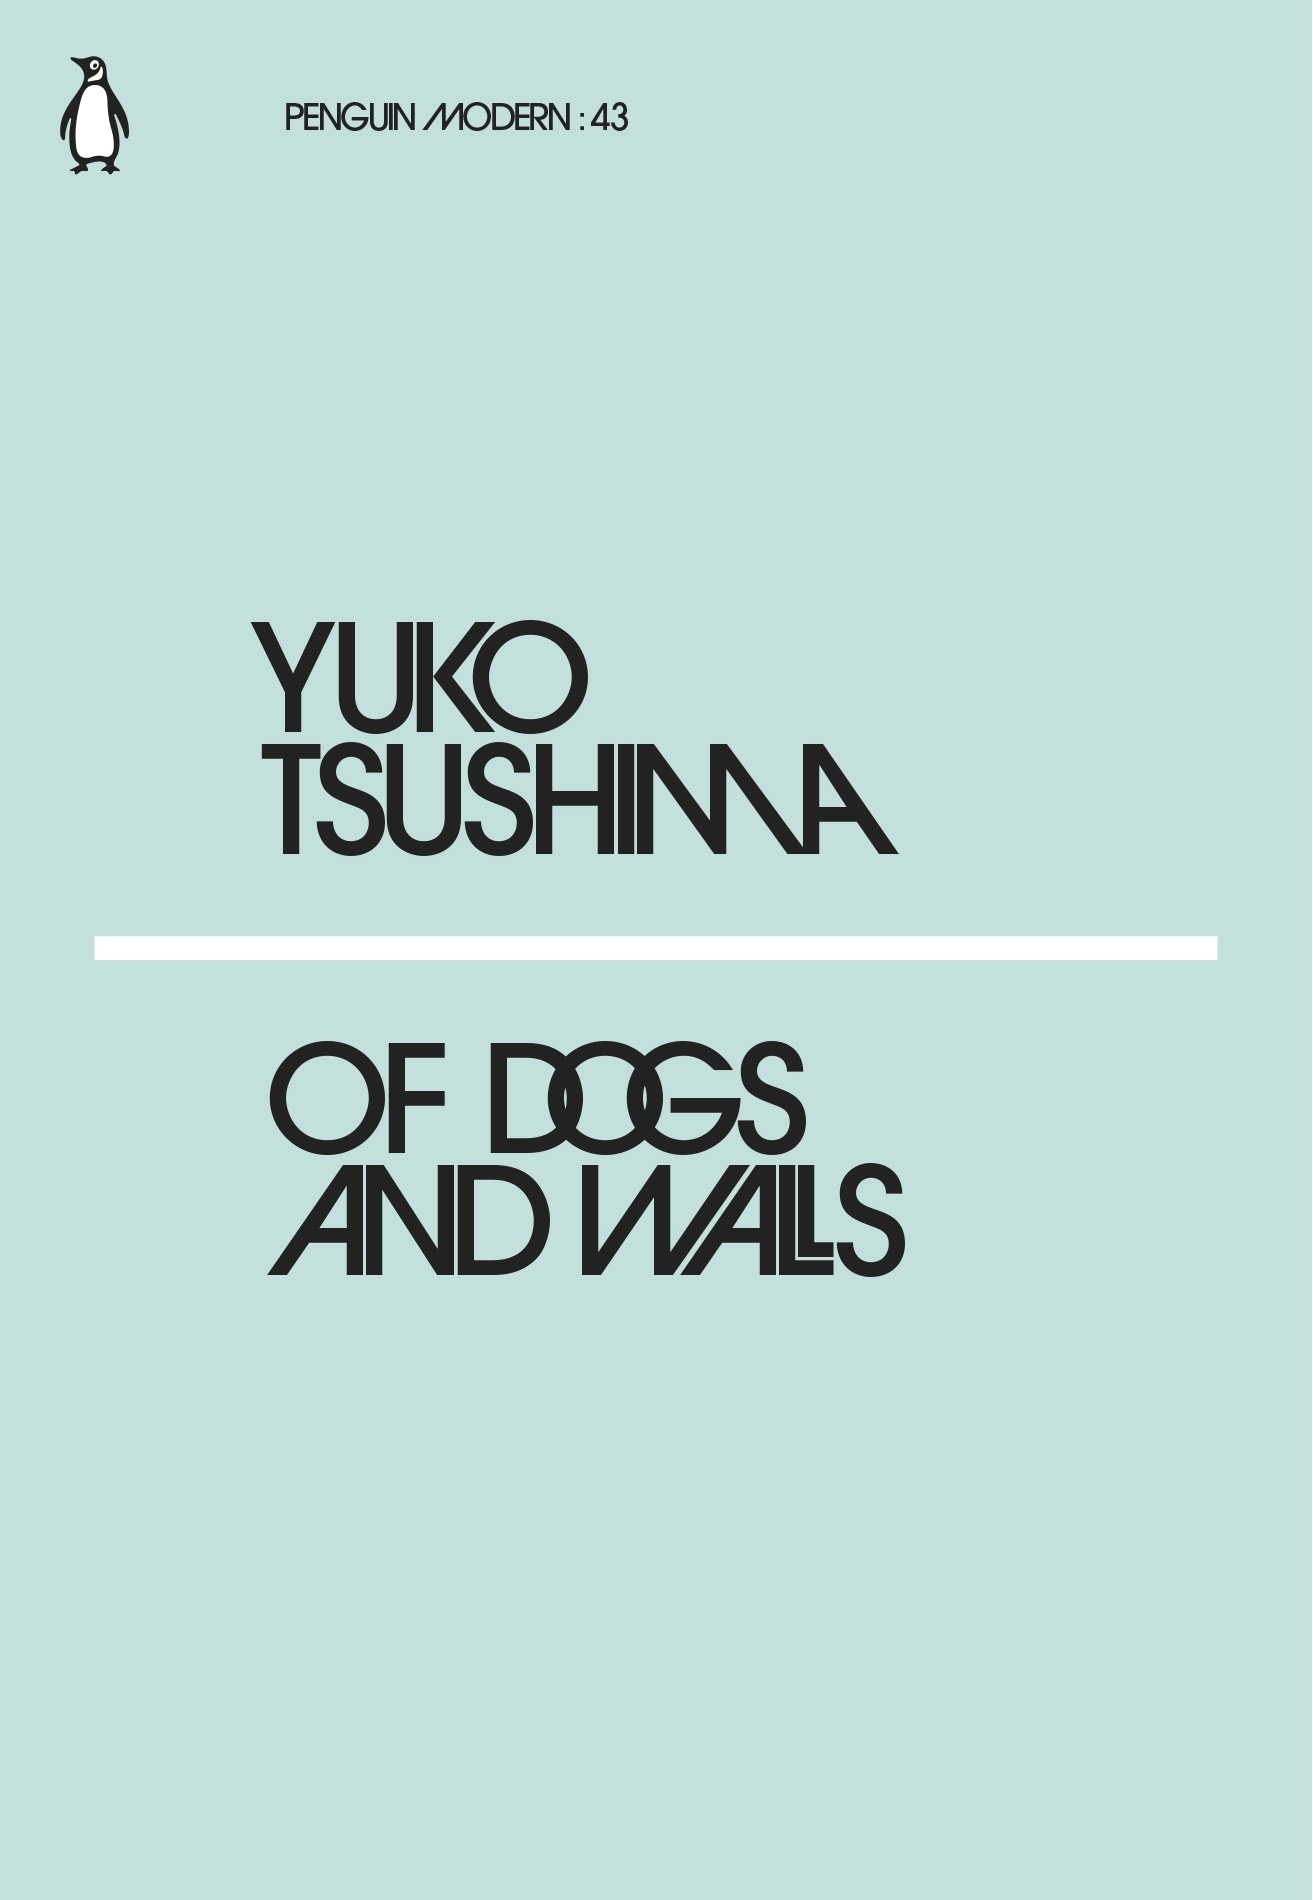 Book “Of Dogs and Walls” by Yuko Tsushima — February 22, 2018